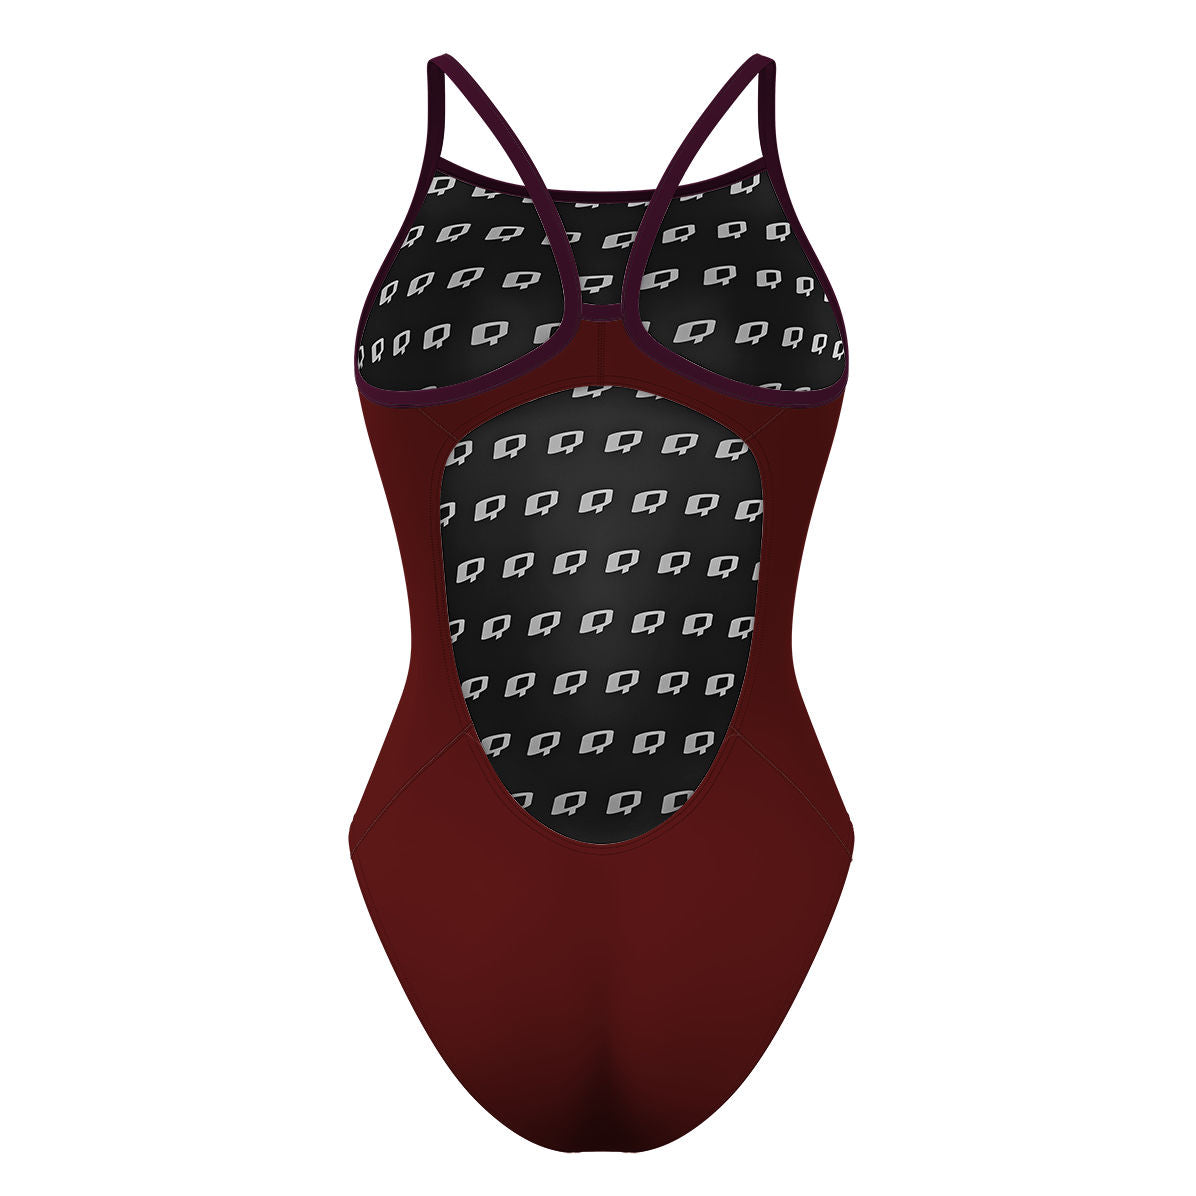 Saint Mary's College HS 2 - Skinny Strap Swimsuit